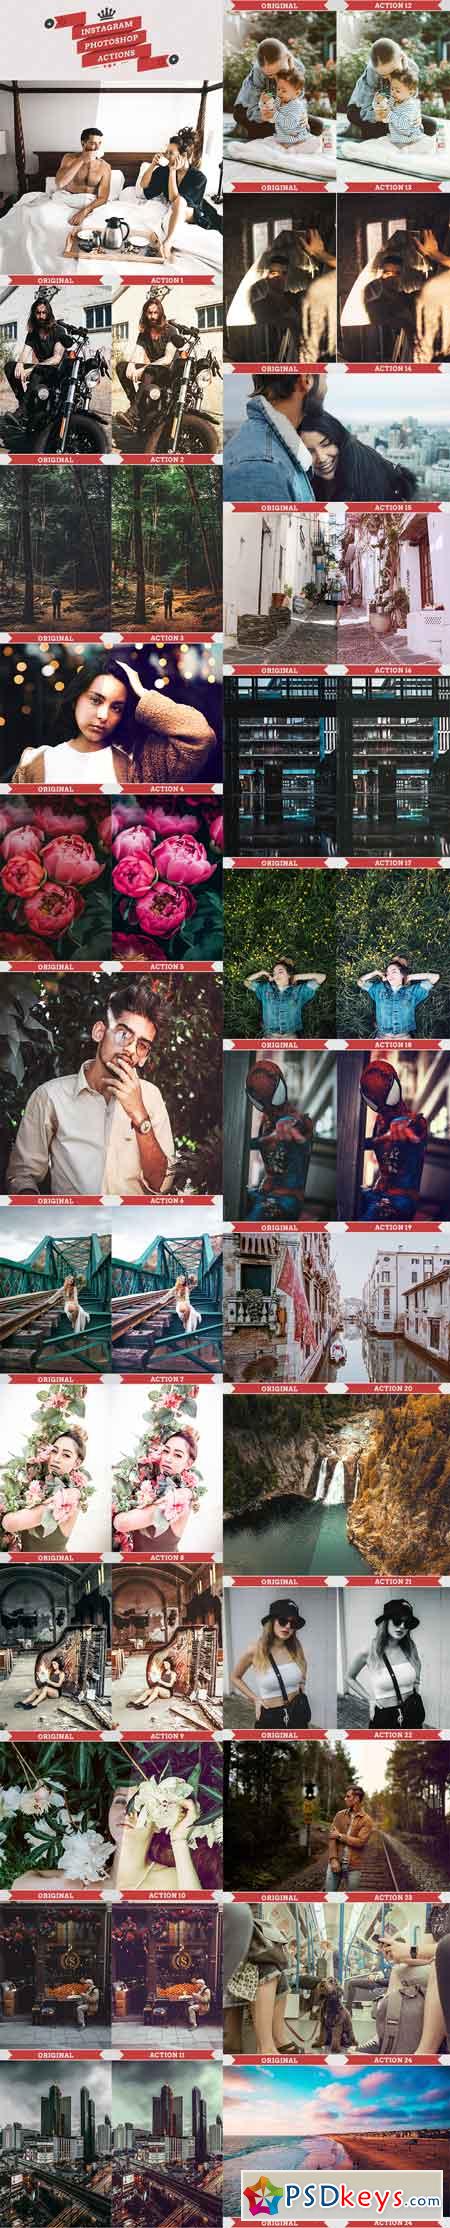 25 Instagram Filters Photoshop Actions 22537324